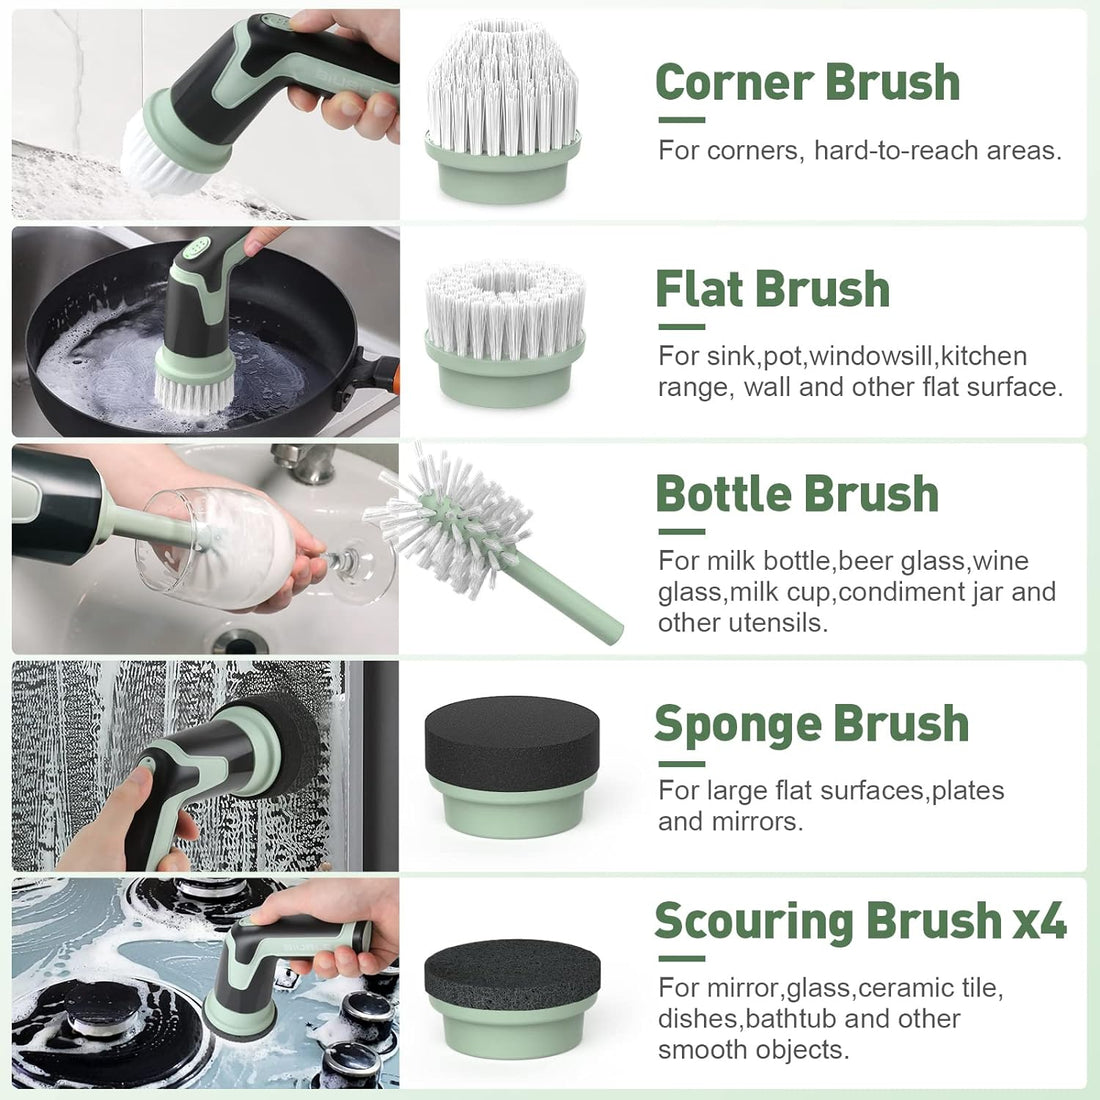 BIUBLE Electric Spin Scrubber, Cordless Power, Bathroom Scrubber with 8 Replaceable Cleaning Brush Heads - Cleaning Floor, Bathroom, Kitchen, Bottle ect